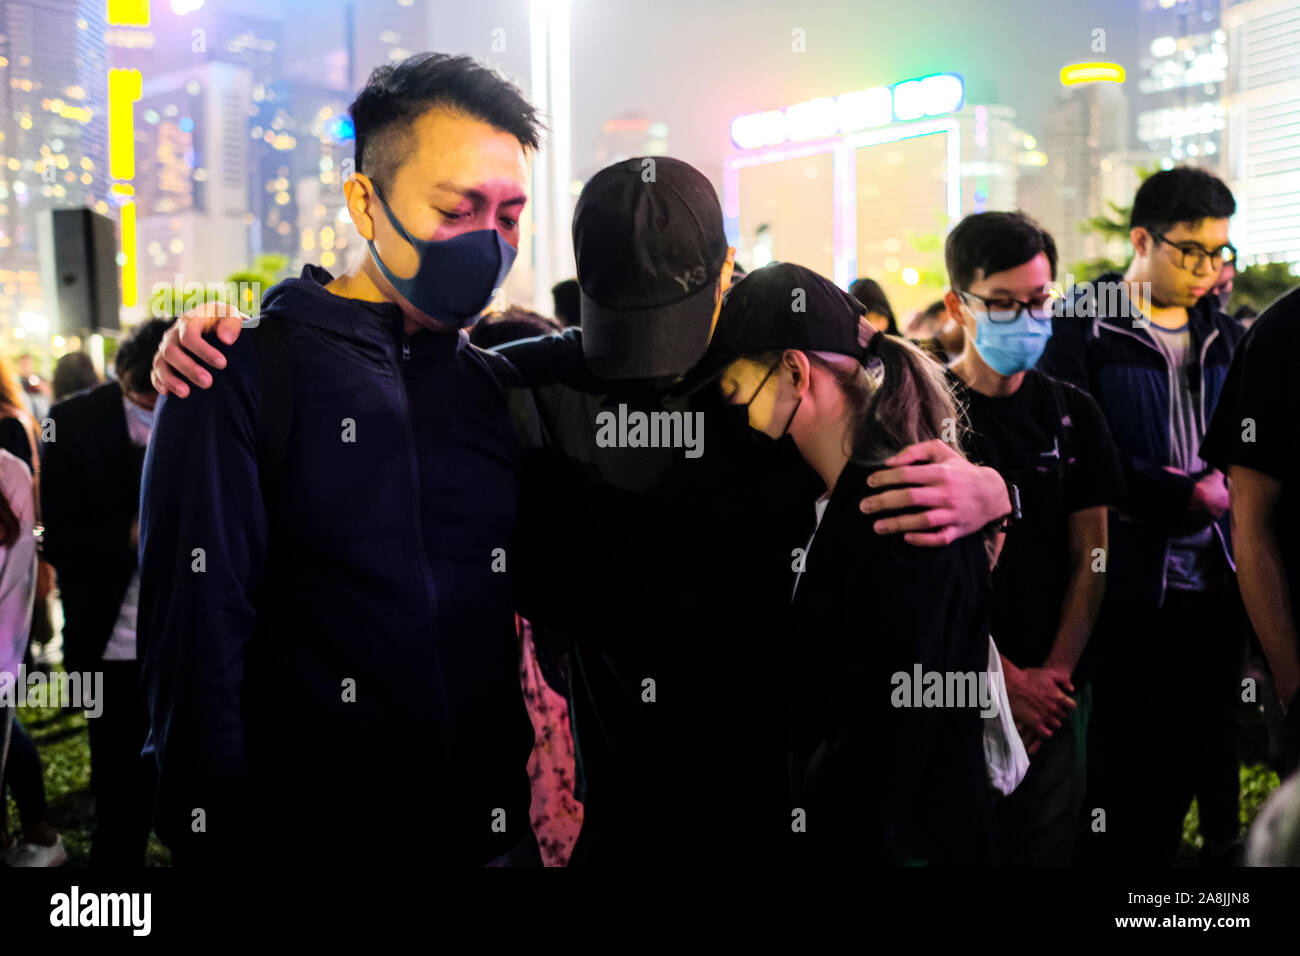 Demonstrators hug each other during the rally.Memorial rally at Tamar Park in Hong Kong to mourn the death of a 22 years old university student, Alex Chow Tsz Lok who died from a serious brain injury during a fall on November 4th as police skirmished with demonstrators last weekend. He was left in critical condition and died after suffering a cardiac arrest. Stock Photo